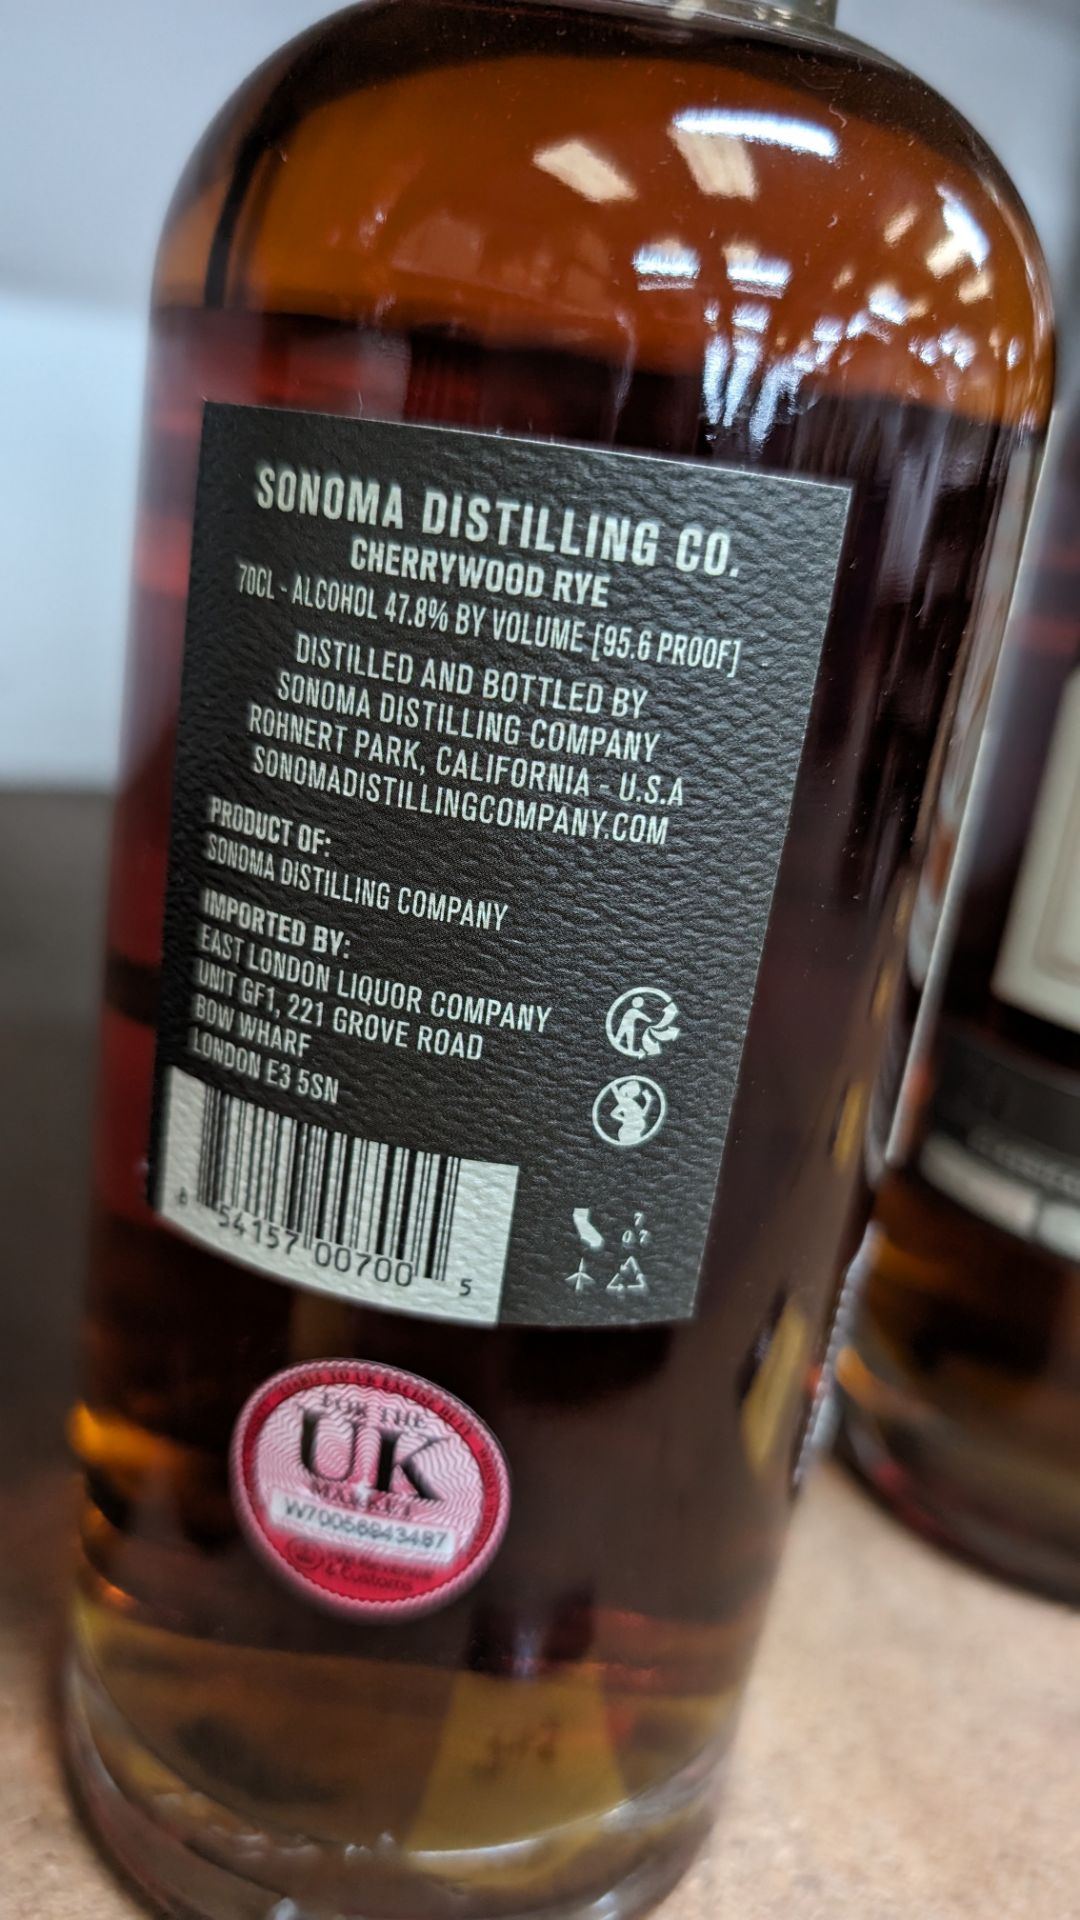 1 off 700ml bottle of Sonoma Cherrywood Rye Whiskey. 47.8% alc/vol (95.6 proof). Distilled and bot - Image 4 of 5